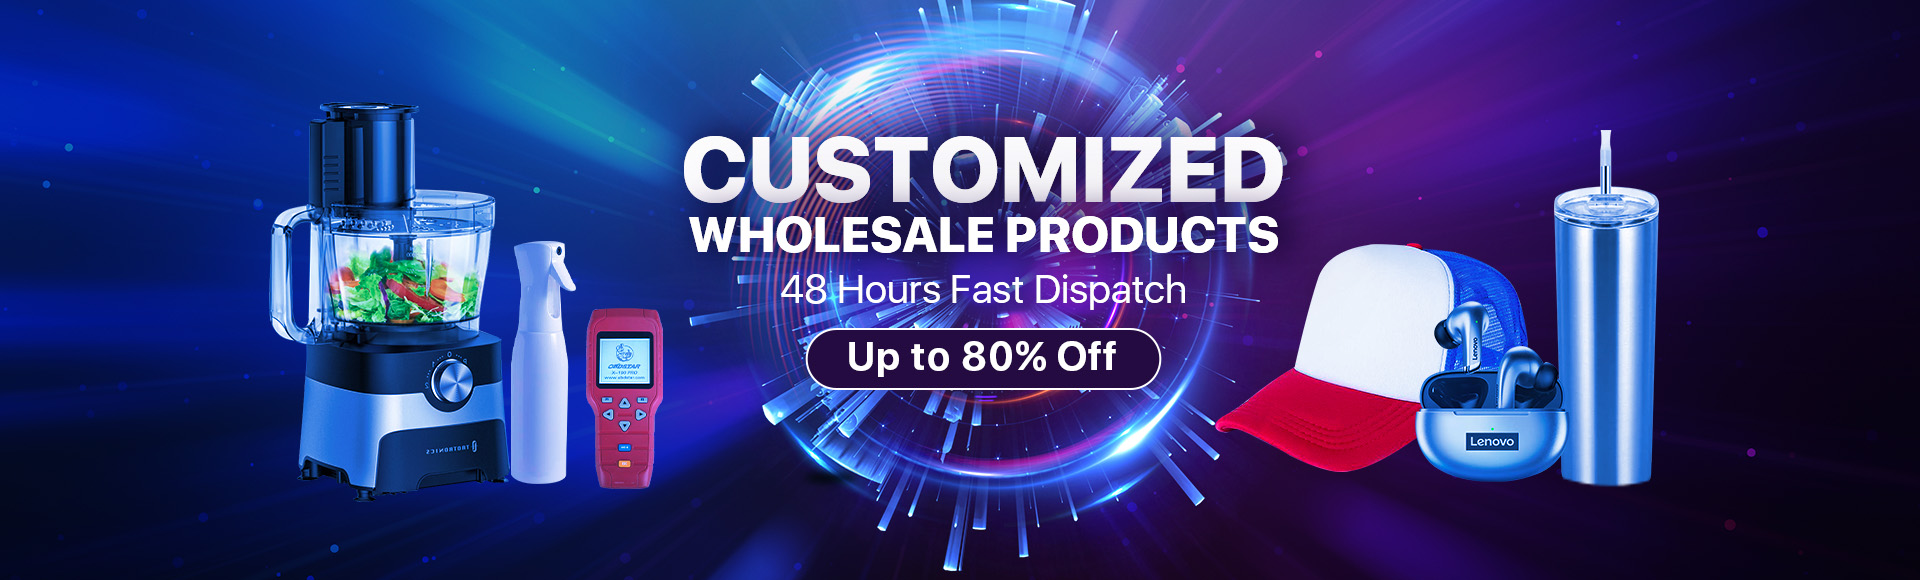 DHgate Customized Wholesale Products, 48 Hours Fast Dispatch, Up To 80% Off